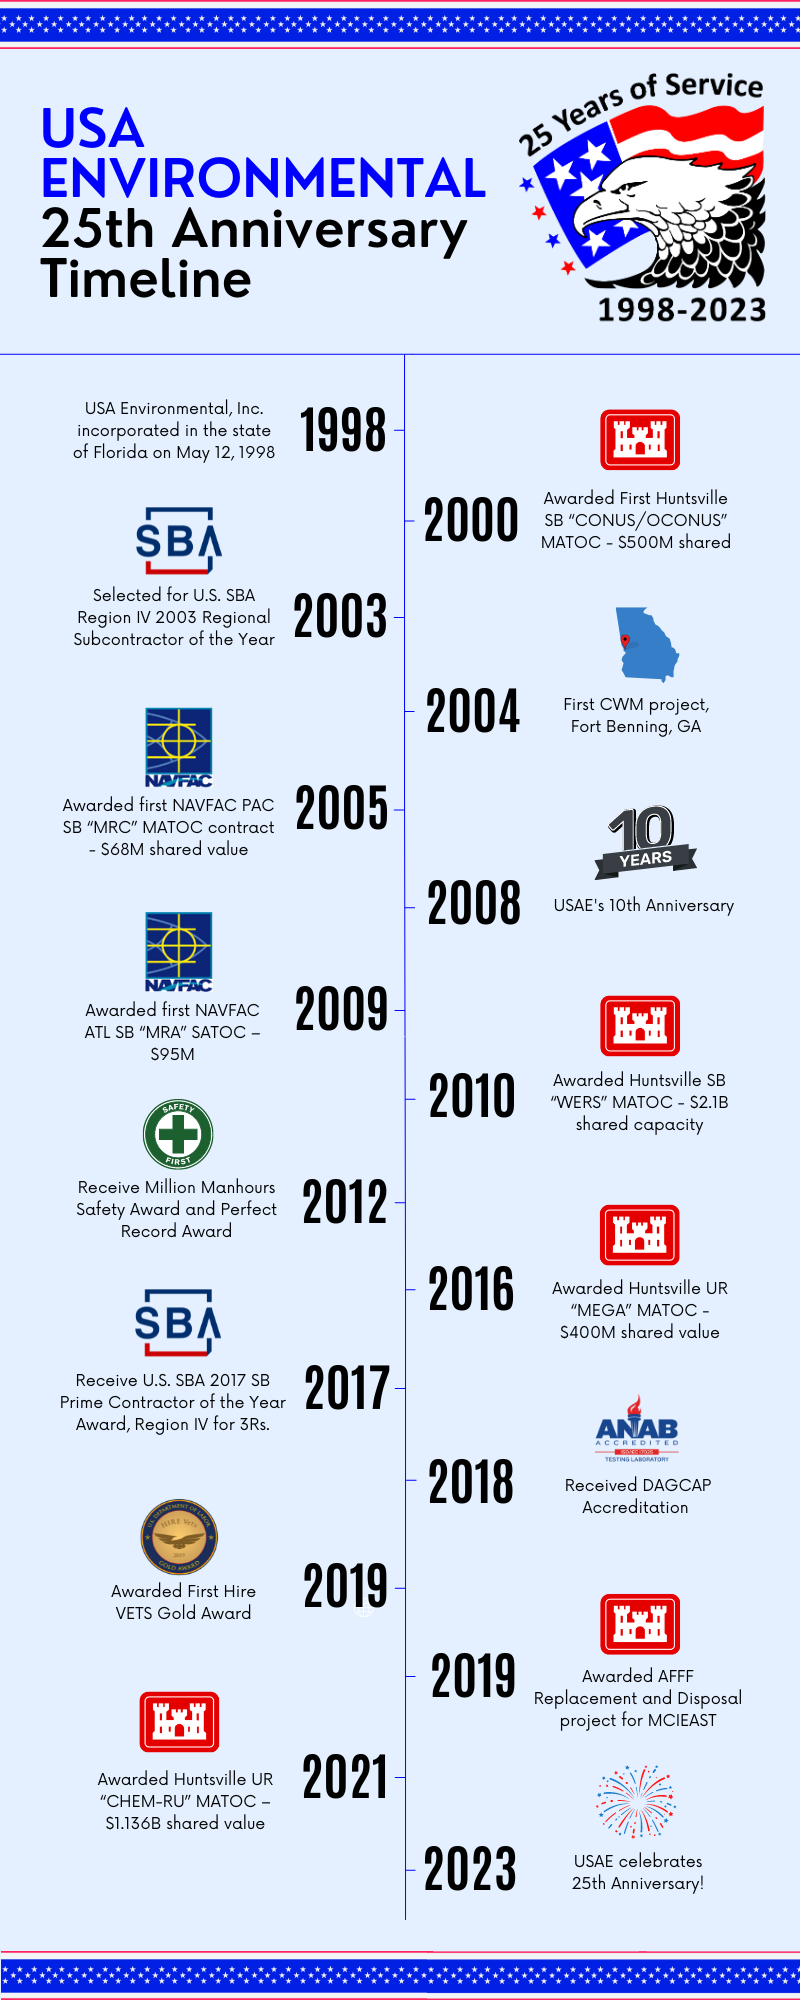 USAE 25th Anniversary Timeline Infographic